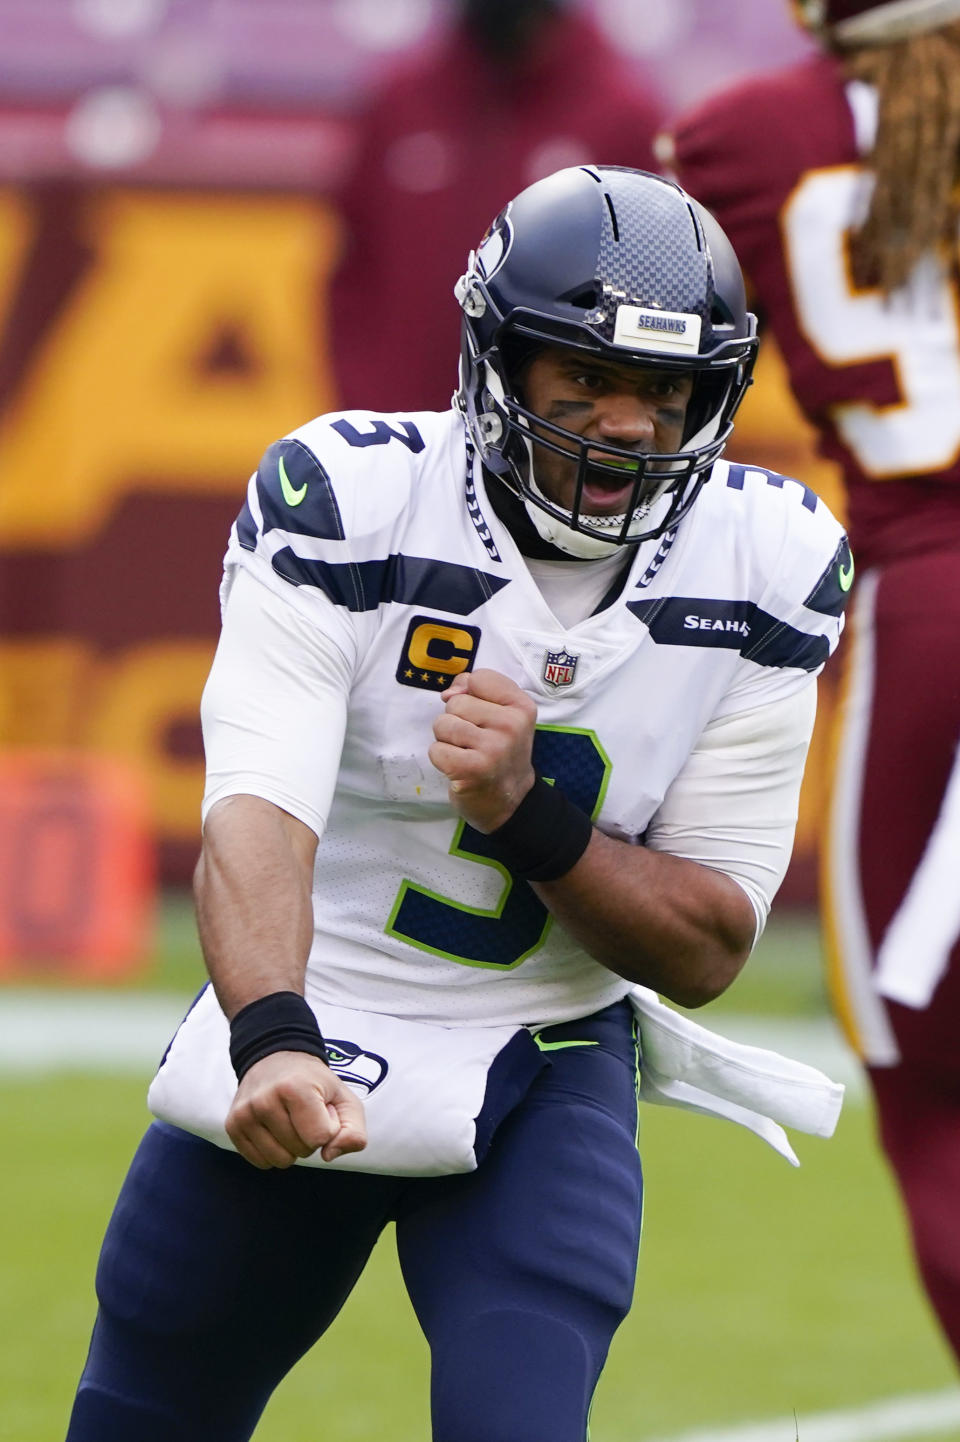 Seattle Seahawks quarterback Russell Wilson (3) celebrating his touchdown pass to tight end Jacob Hollister (86) during the first half of an NFL football game against the Washington Football Team, Sunday, Dec. 20, 2020, in Landover, Md. (AP Photo/Susan Walsh)